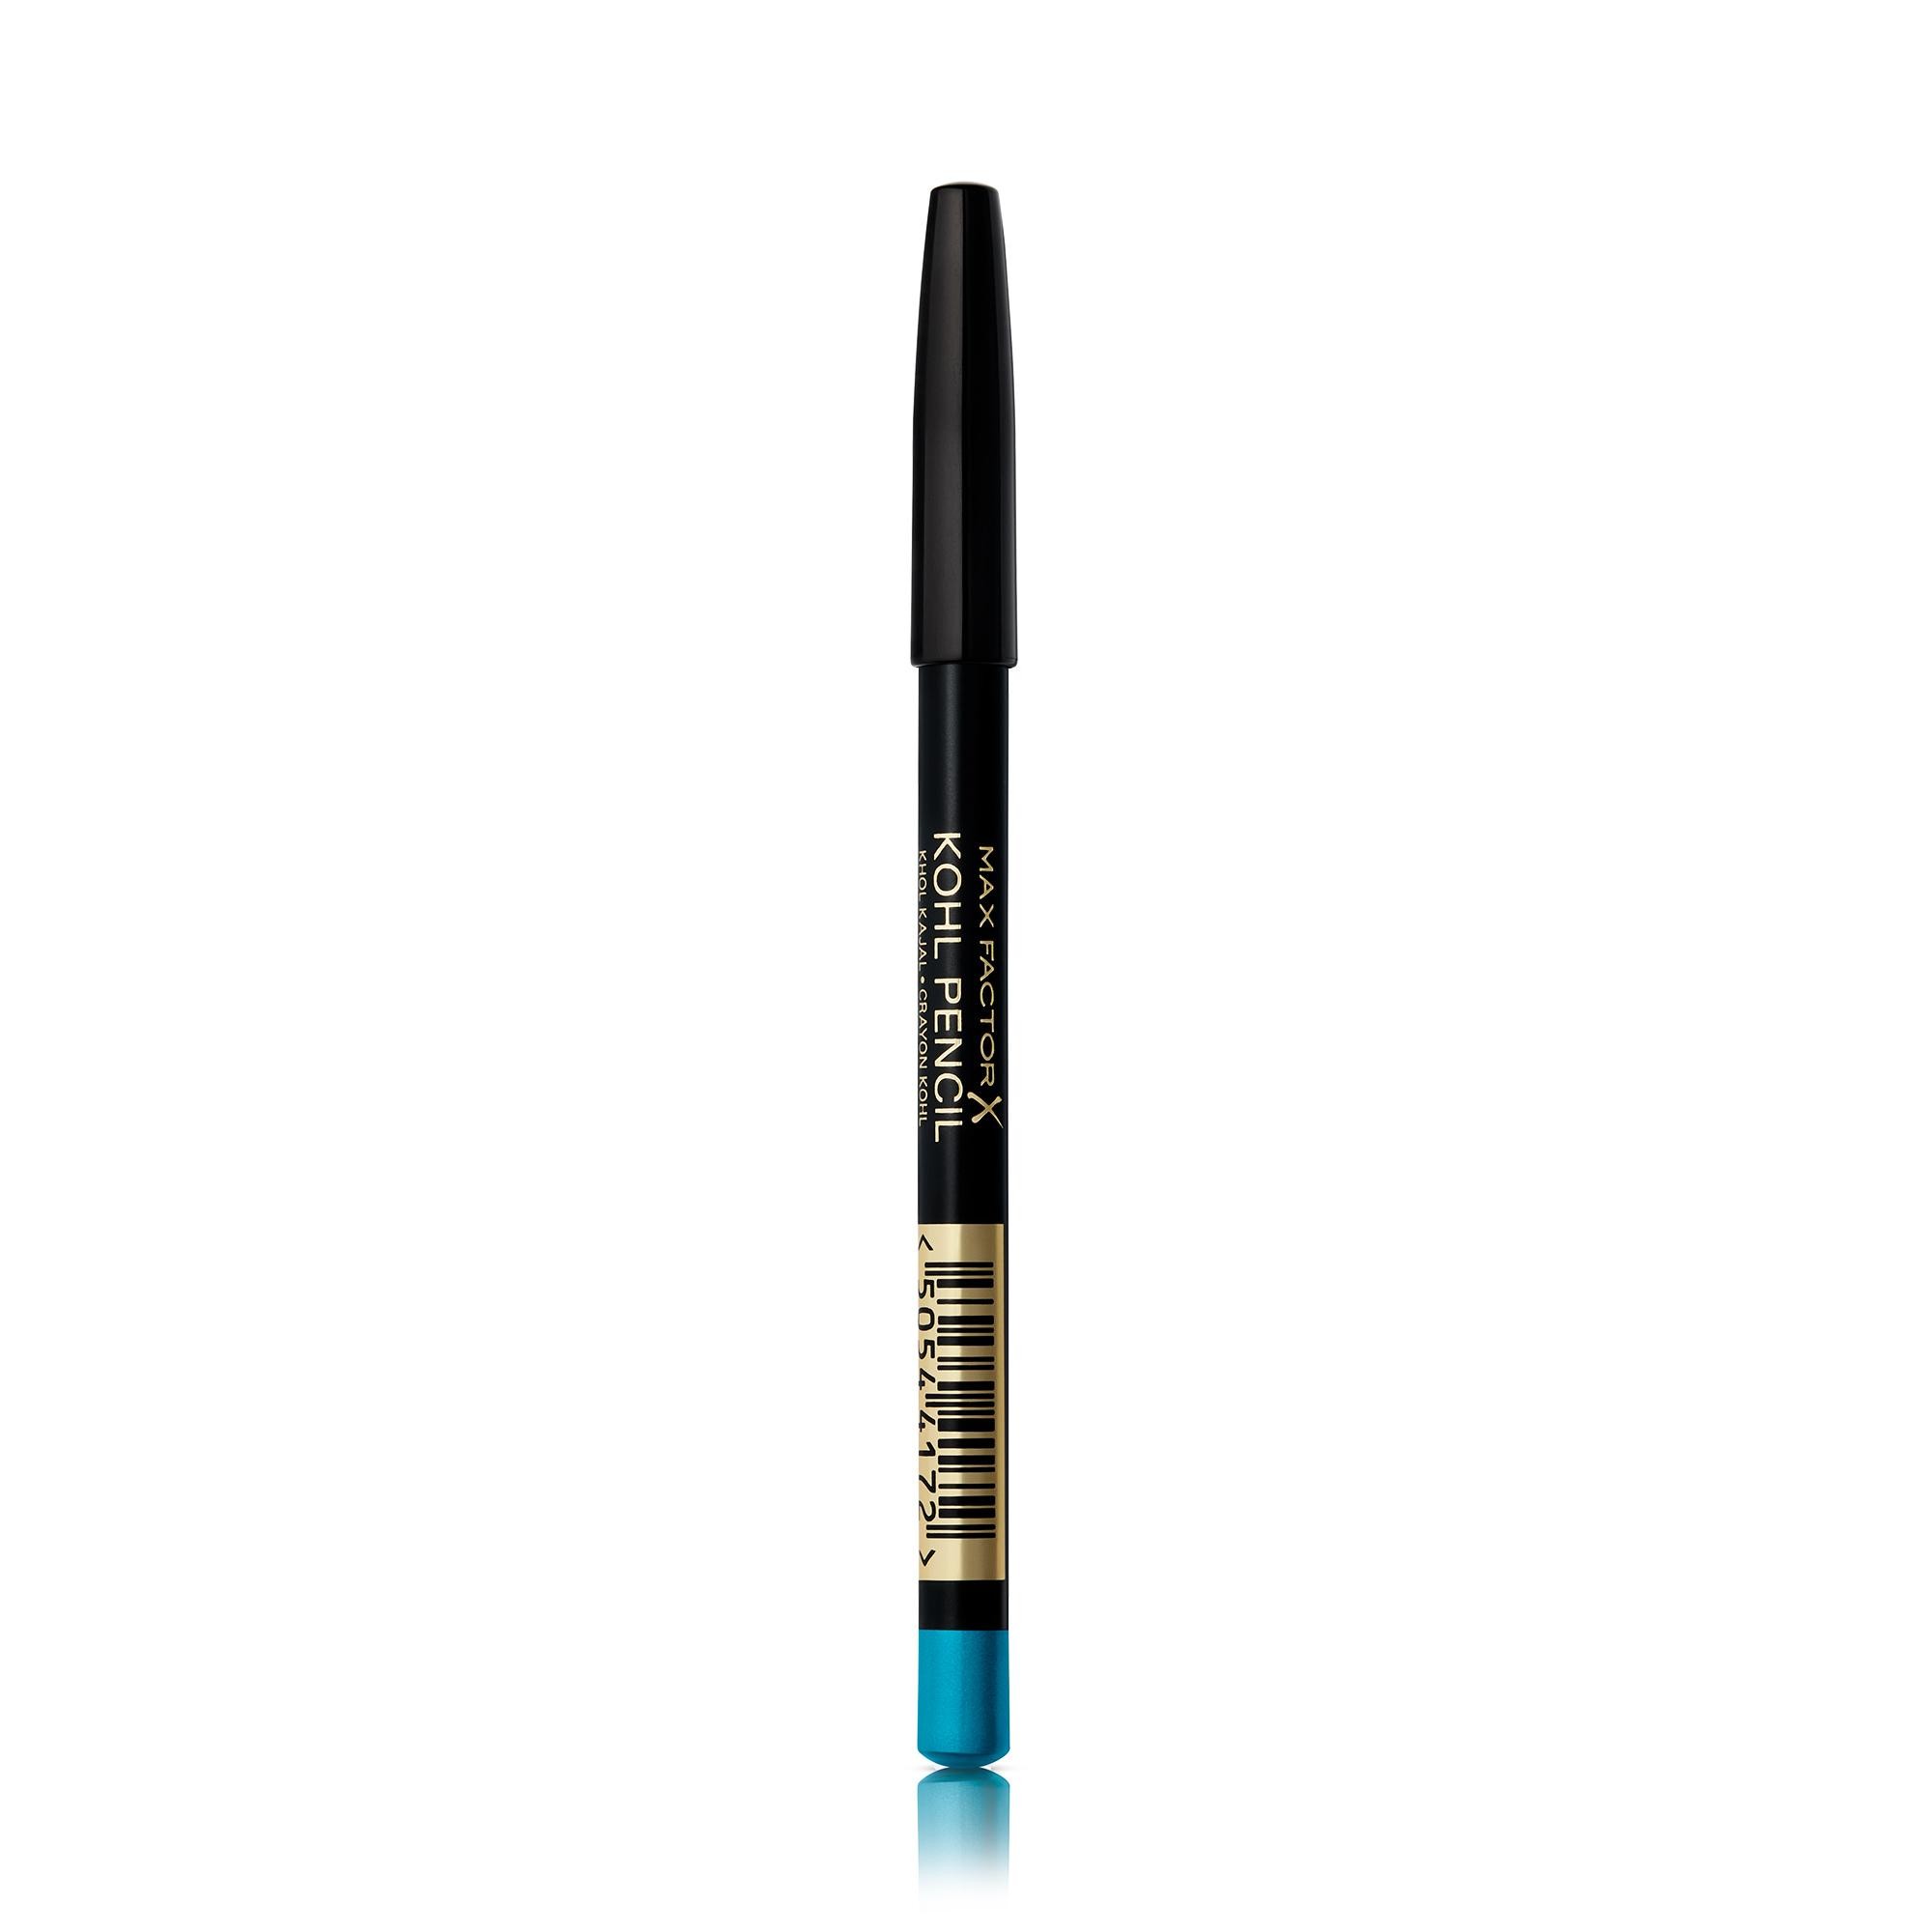 Max Factor Kohl Pencil, 060 Ice Blue, 1.2g